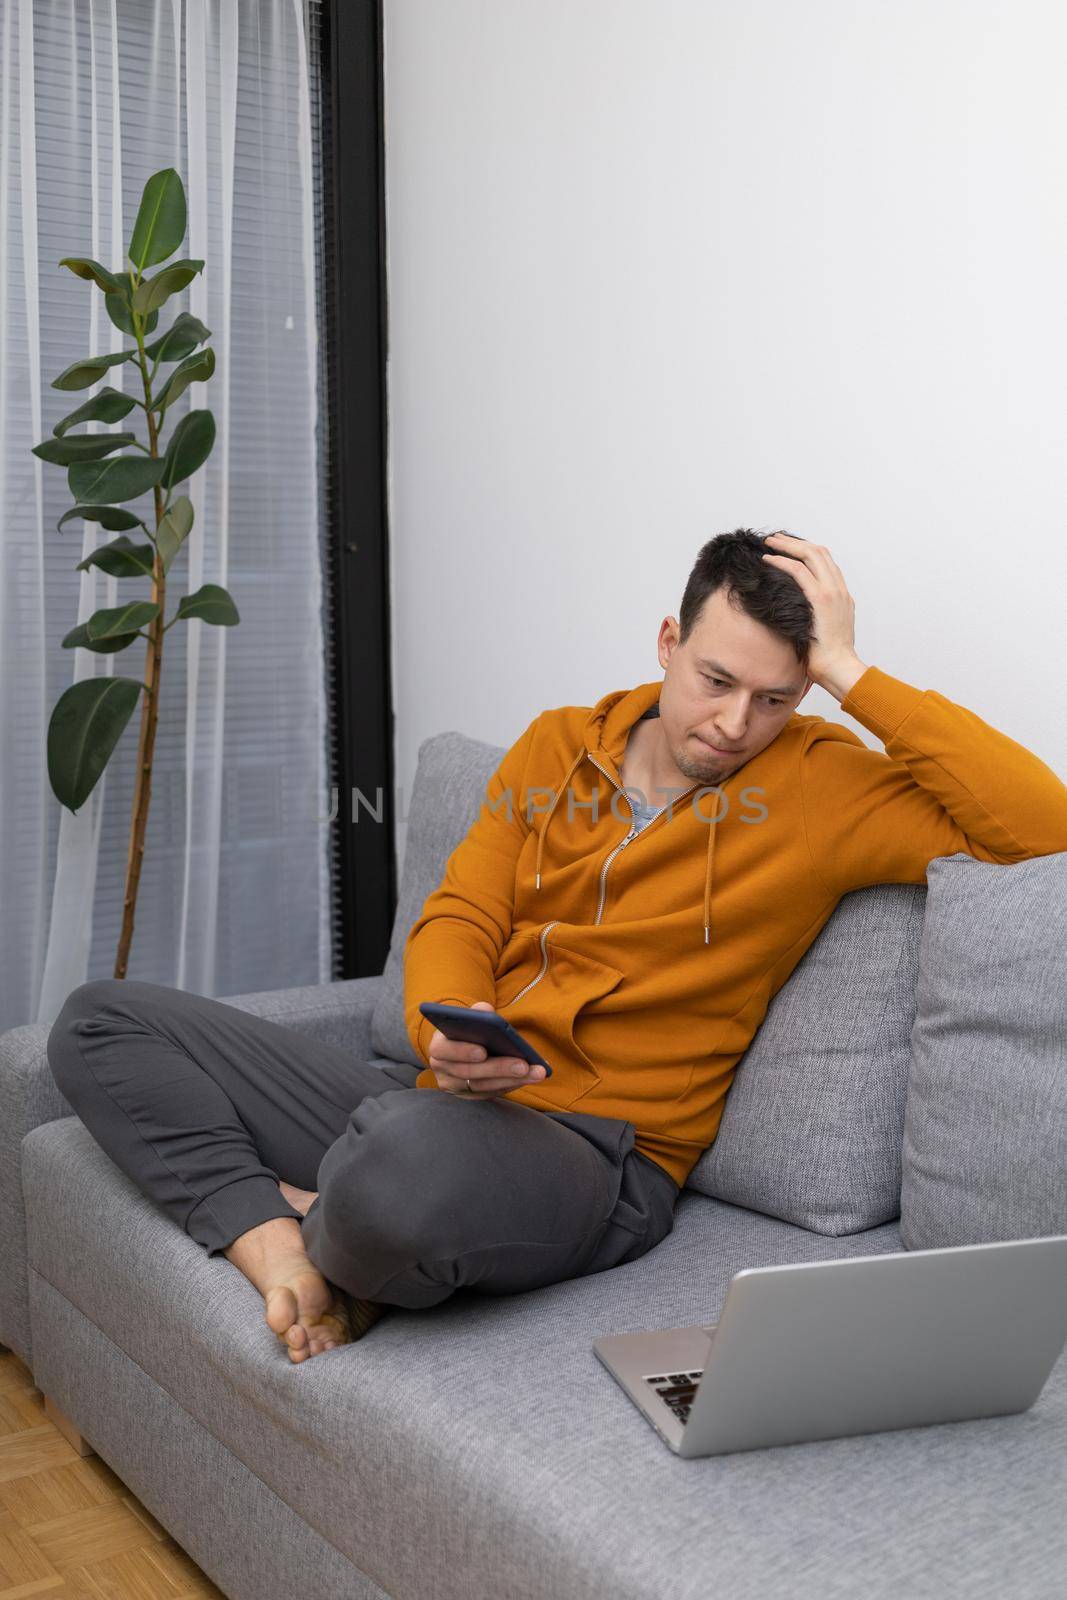 young man watching at mobile phone playing game. High quality photo